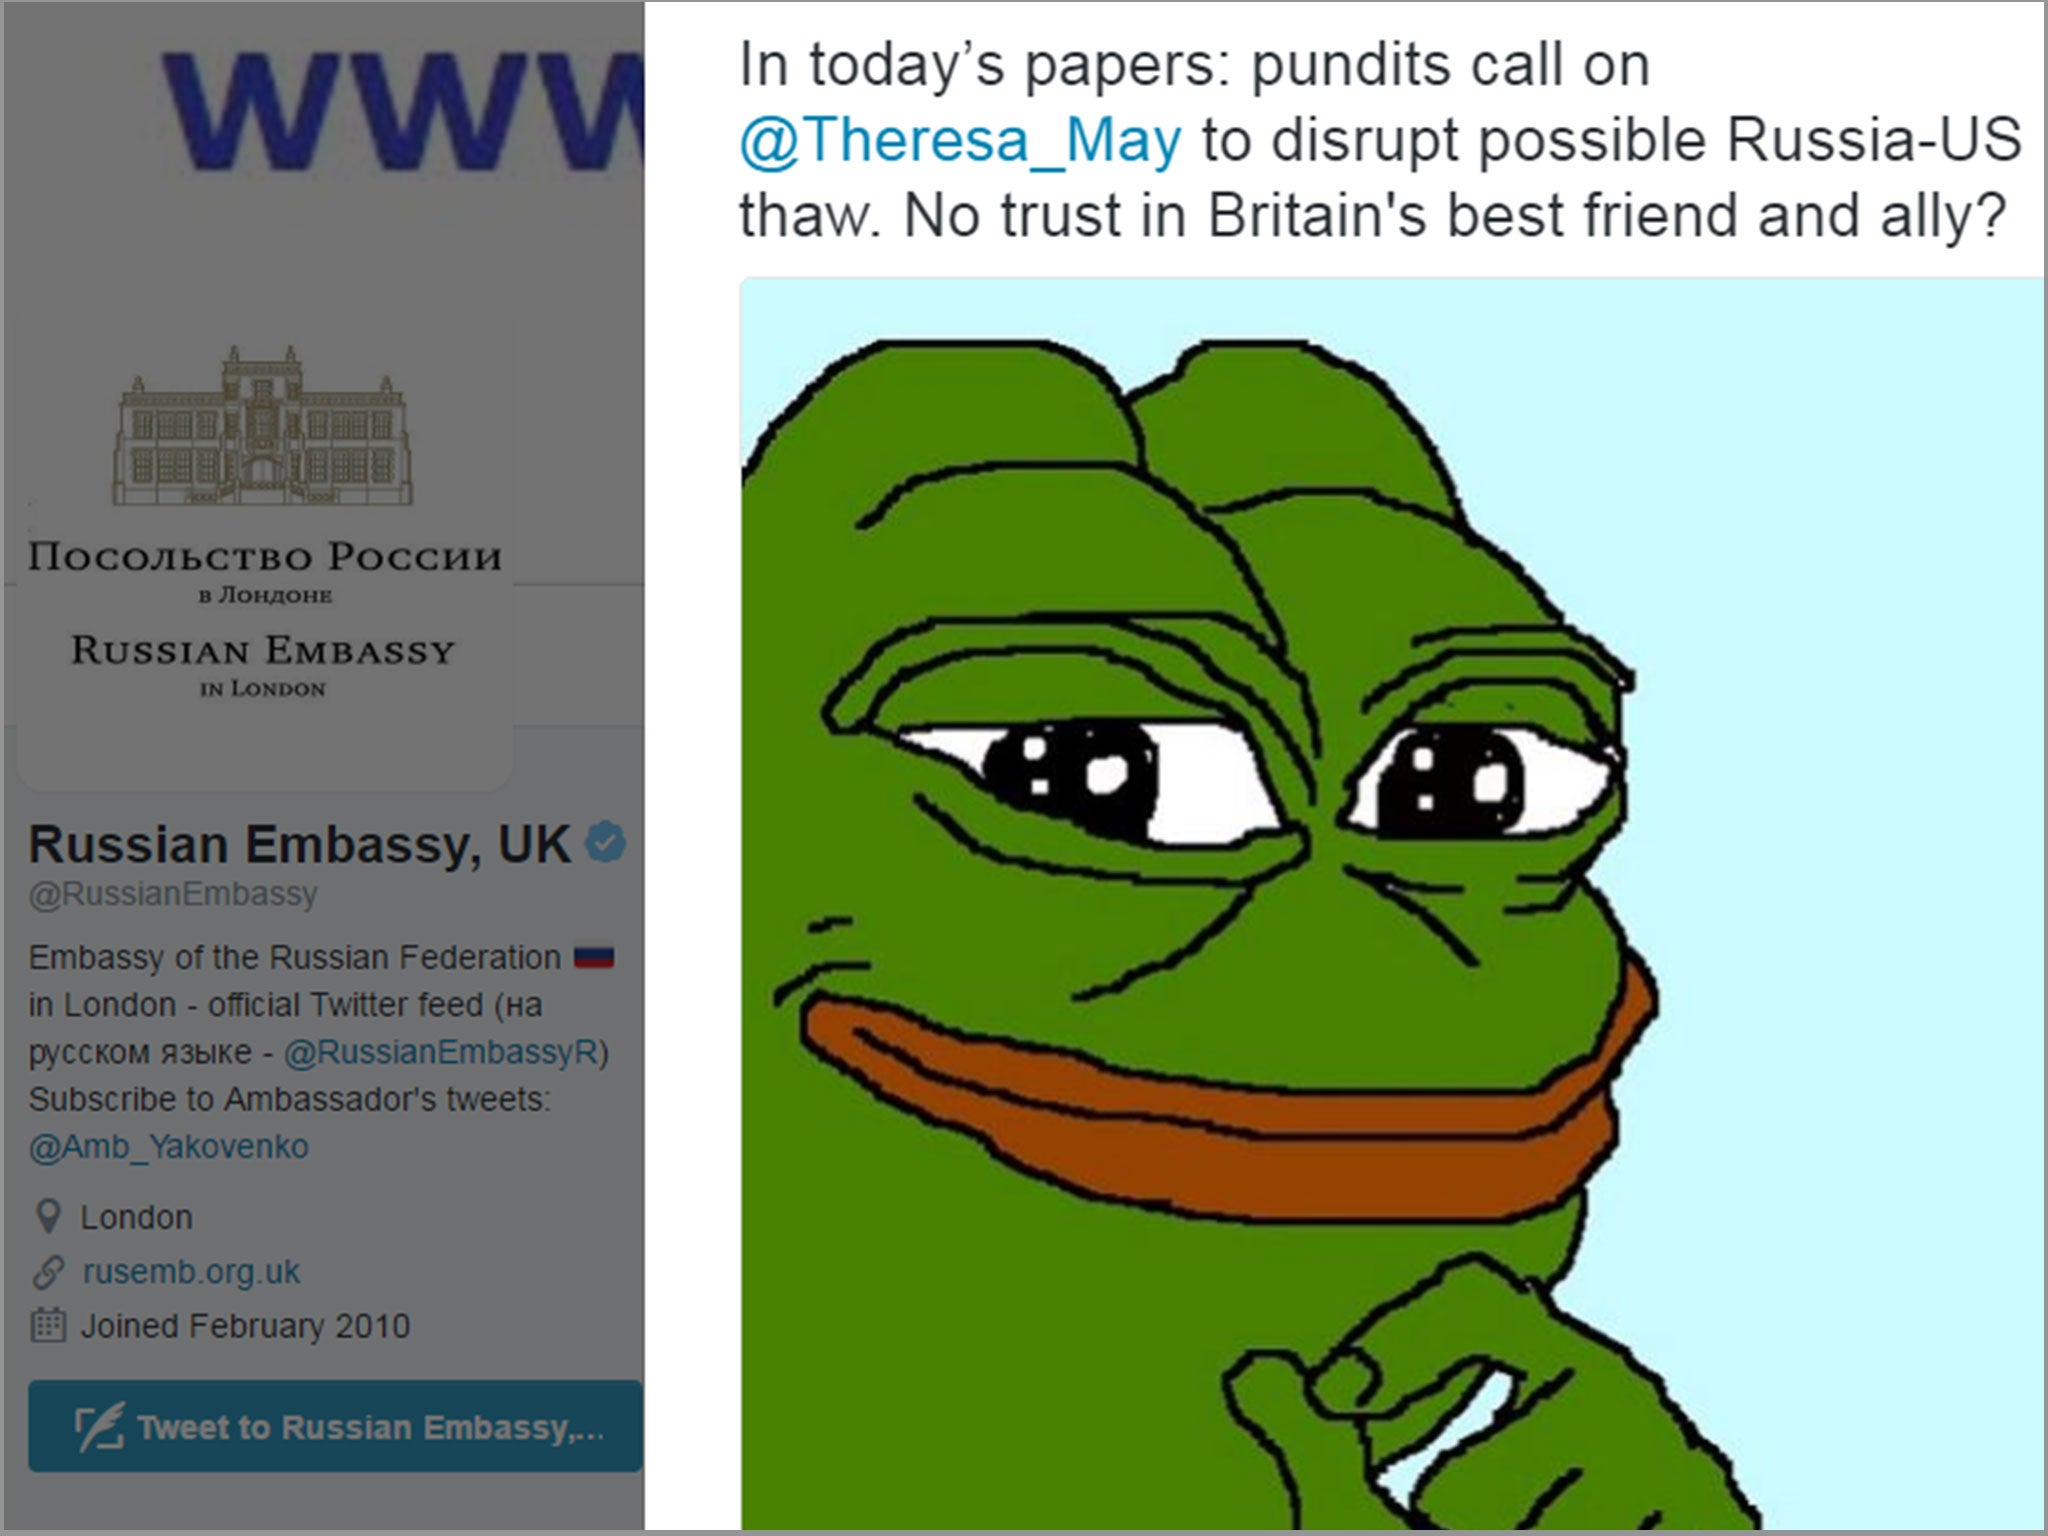 Russian Embassy In London Hits Out At Theresa May With White Supremacist Pepe The Frog Meme The Independent The Independent,Robo Dwarf Hamster Drawing